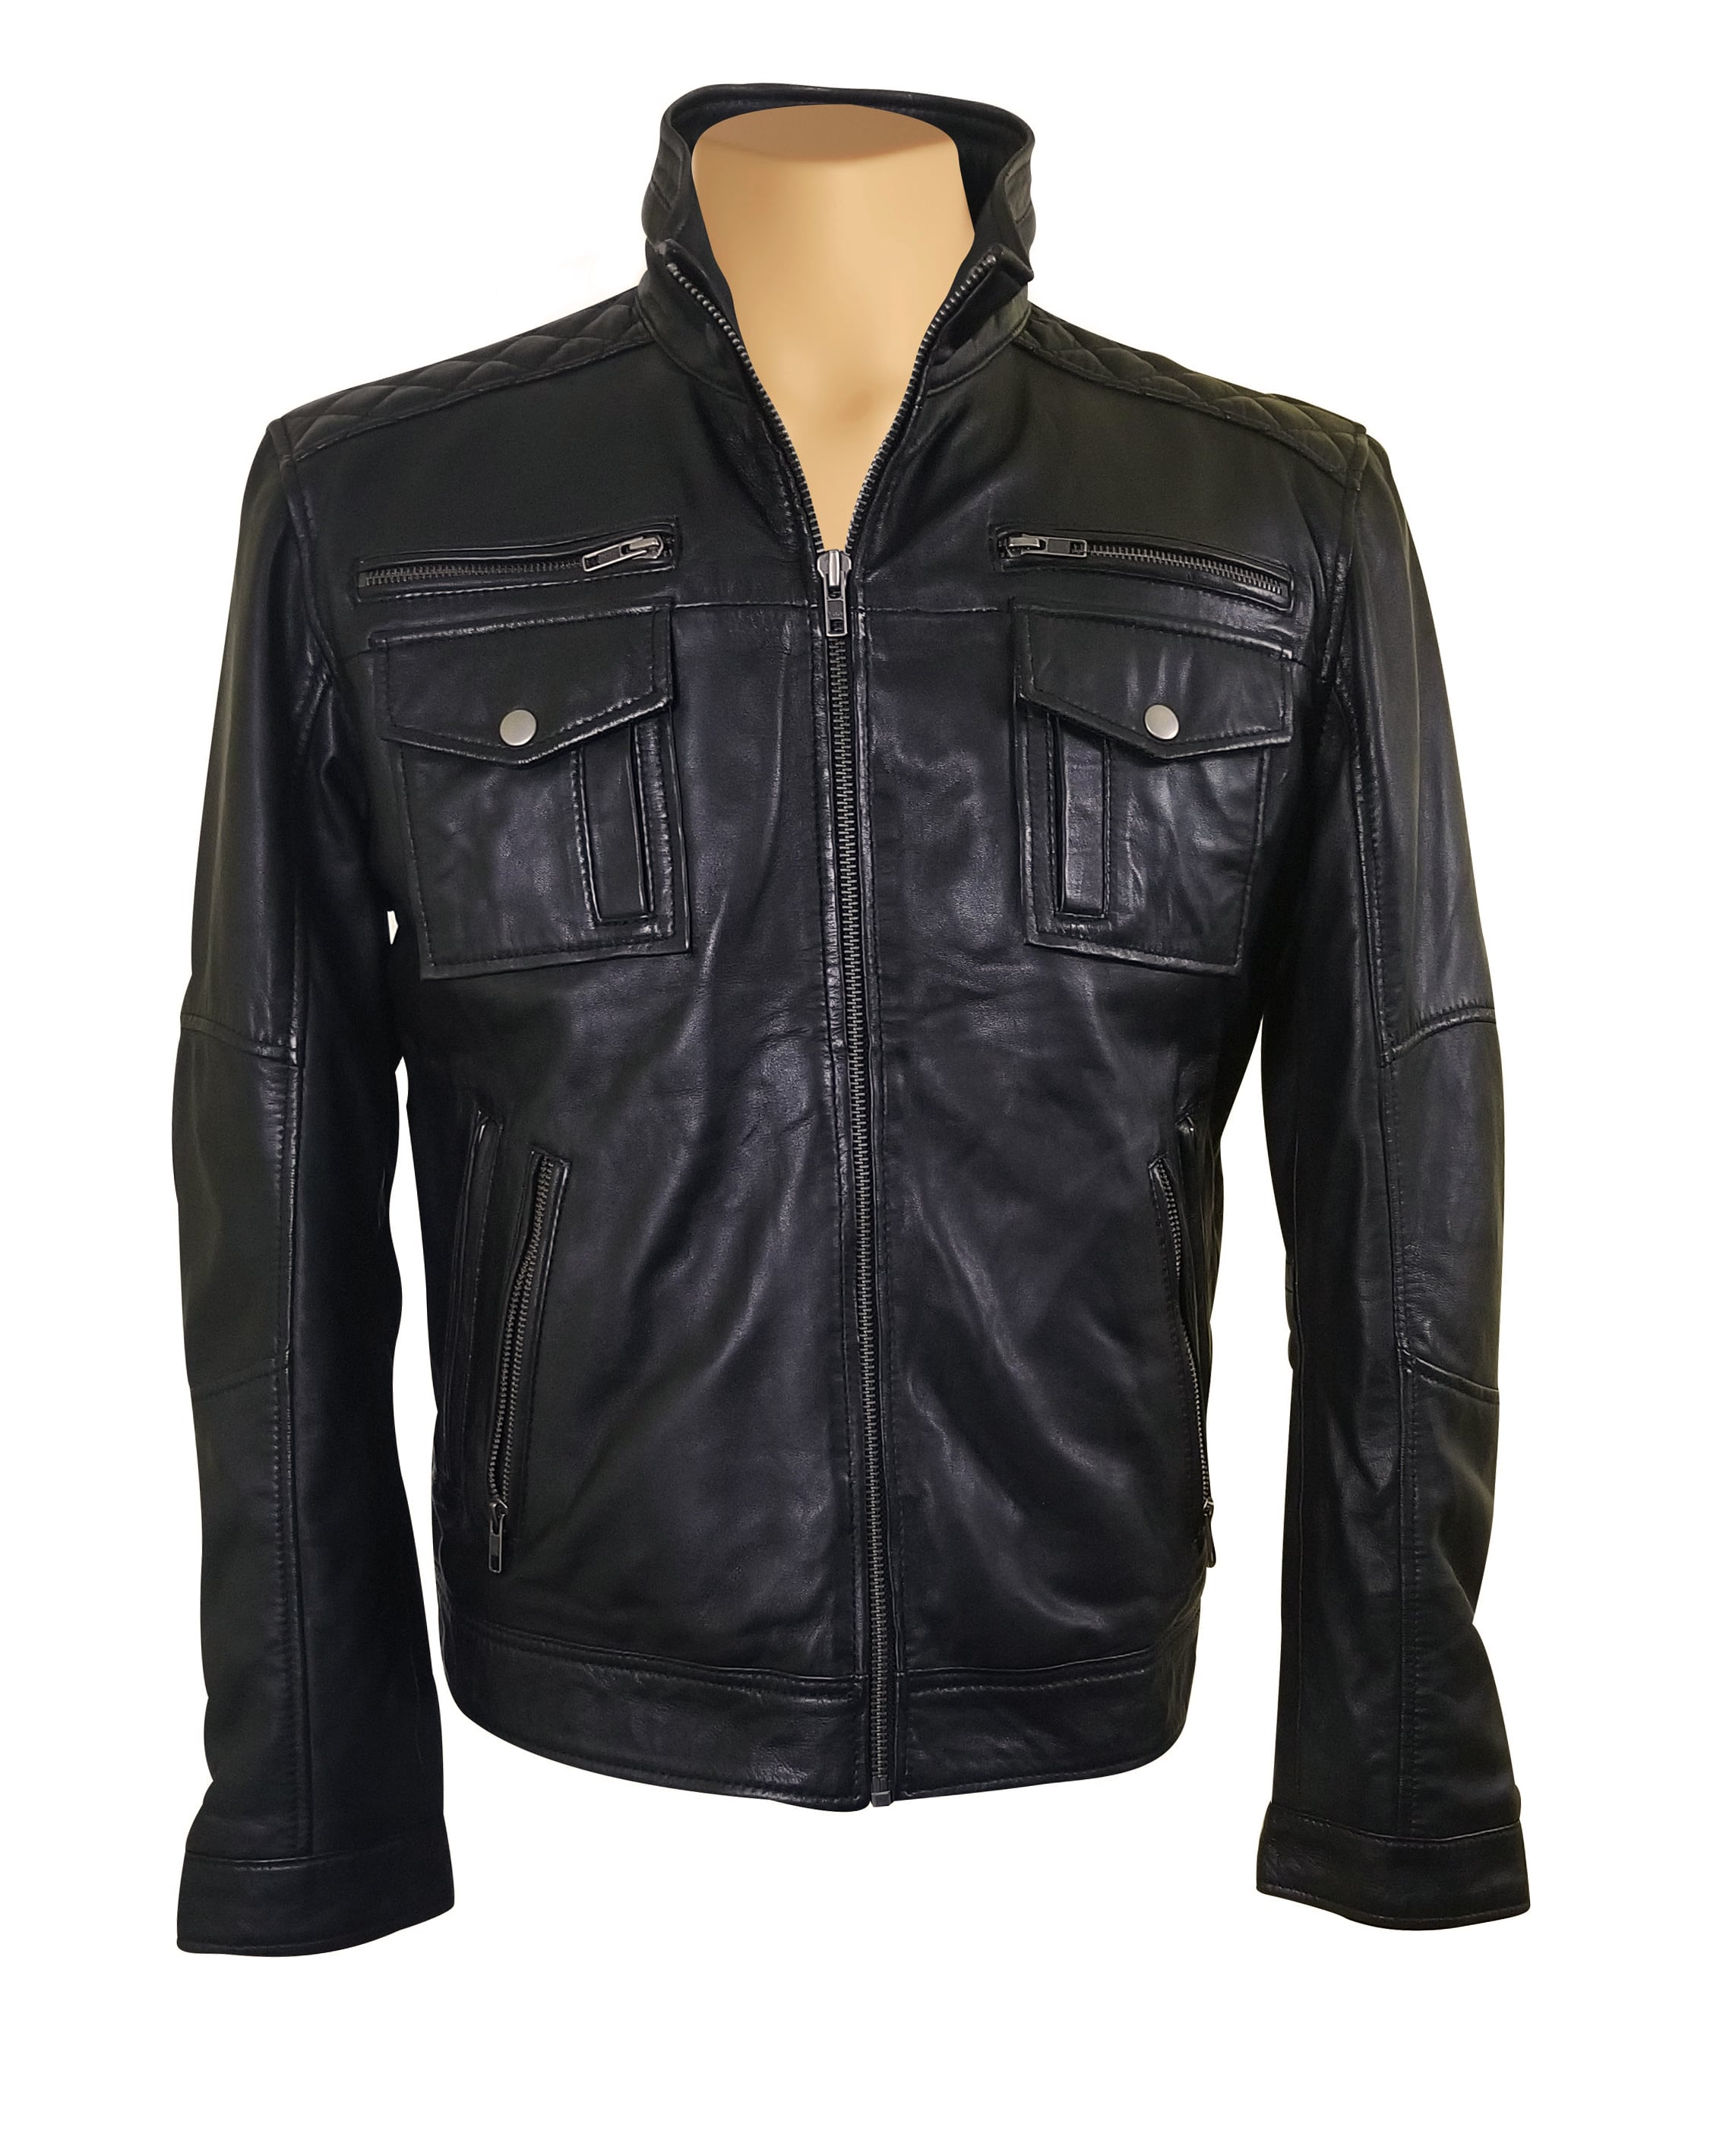 Black Zip up leather jacket with flap pockets and 6 other pockets ...